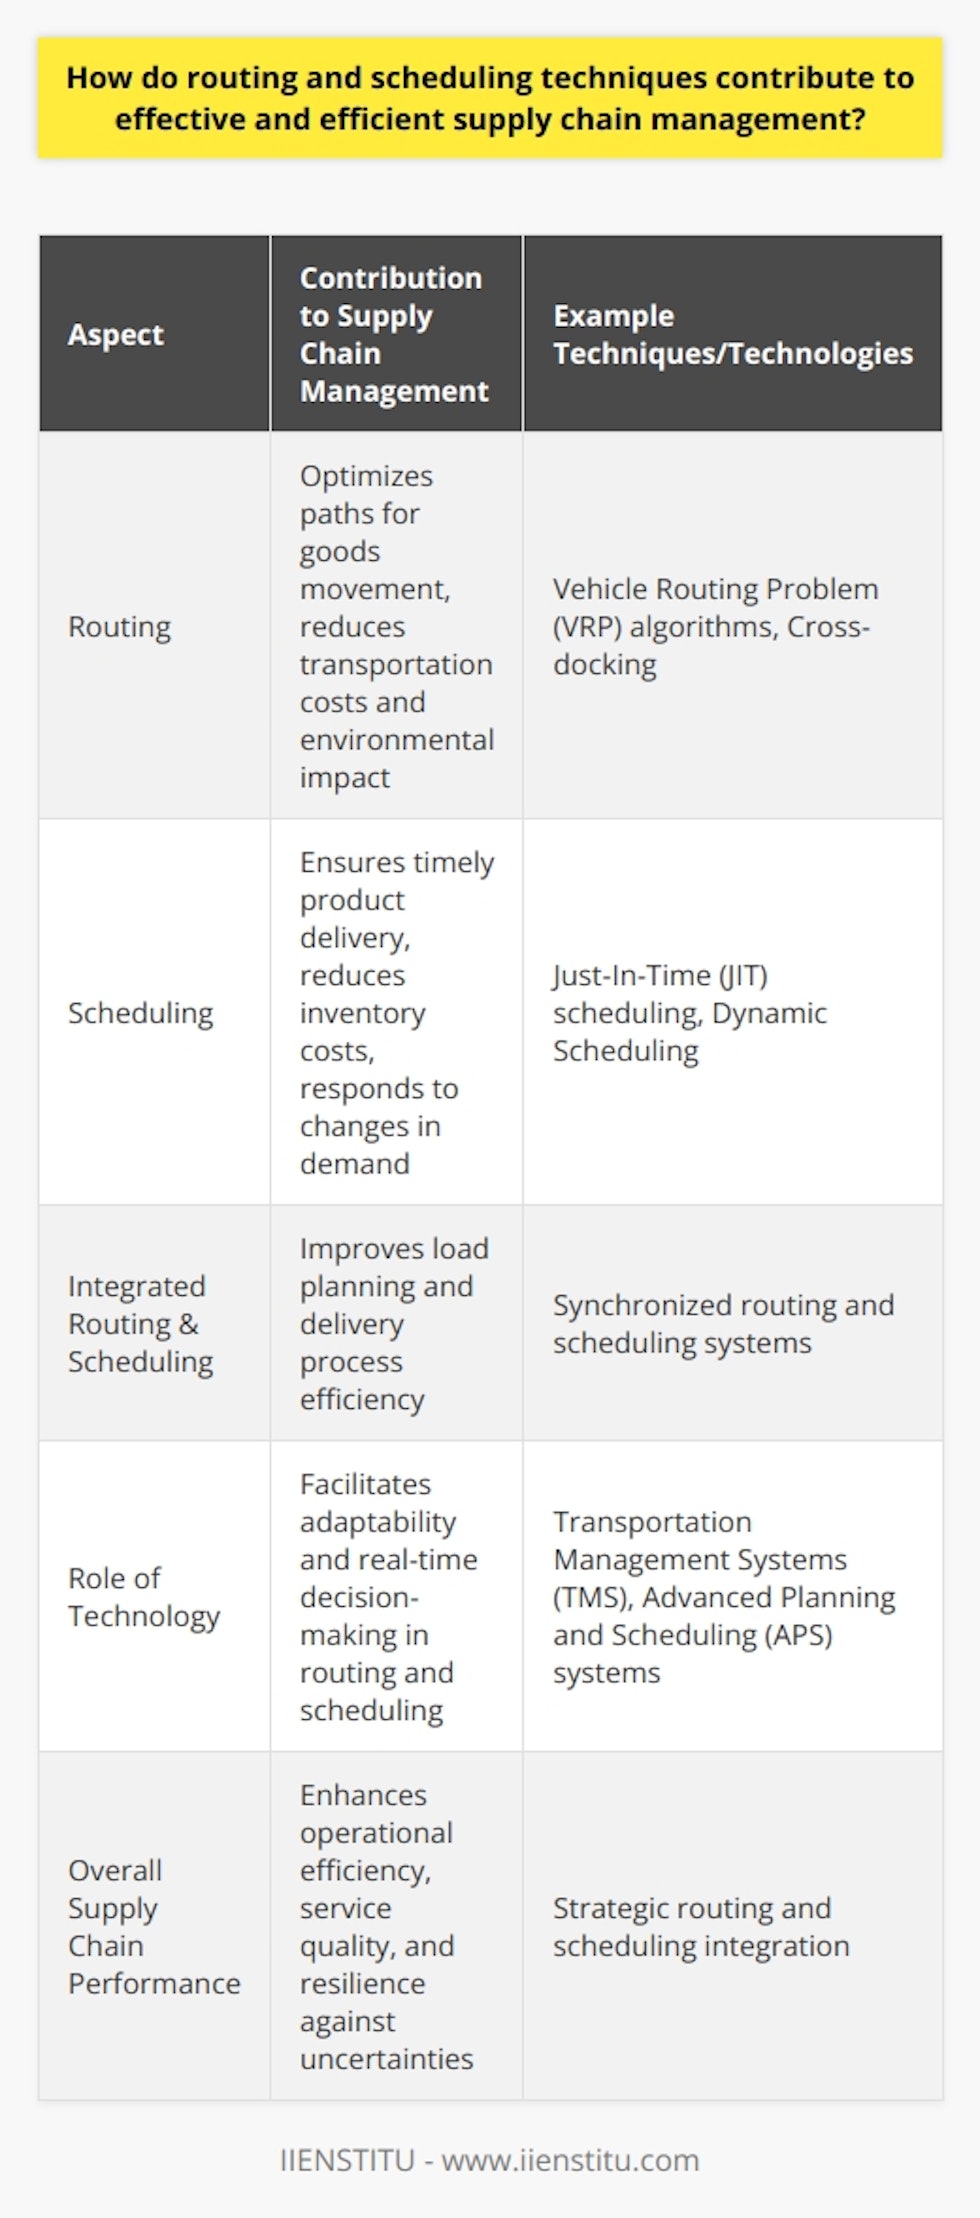 **Efficient Routing: Enhancing Supply Chain Dynamics**In supply chain management, routing is a strategy that involves determining the most cost-effective and time-conscious paths for the movement of goods from suppliers to customers. A well-planned routing system addresses the complexities associated with geographical constraints, transportation modes, consolidation points, and cross-docking practices.Routing is not a one-size-fits-all approach and often requires a high level of customization. For instance, the Vehicle Routing Problem (VRP) algorithms are used to optimize the routes of delivery vehicles with specific capacity constraints. These algorithms minimize not only the number of trucks on the roads but also the cumulative distance traveled, leading to significant cost savings and environmental benefits.**Scheduling: The Backbone of Supply Chain Coordination**Scheduling in supply chain management involves the allocation of resources, such as labor and equipment, to various tasks over time. An effective scheduling system ensures the right products are manufactured or delivered at the right time, in the right quantity, to meet customer demand.Advanced scheduling techniques encompass Just-In-Time (JIT) scheduling, which focuses on producing goods in response to actual demand, thus reducing inventory levels and costs. Additionally, Dynamic Scheduling adjusts plans in real-time to address unforeseen disruptions or changes in demand, maintaining the agility of the supply chain.**Routing and Scheduling: A Synchronized Strategy**The integration of routing and scheduling techniques is essential for operational efficiency. For example, synchronized routing and scheduling help in optimizing load planning, enabling trucks to be loaded in a sequence that aligns with delivery schedules, which accelerates the supply chain process from warehouse to delivery points.**Routing and Scheduling: The Role of Technology**Advancements in technology have greatly enhanced the effectiveness of routing and scheduling methods. Modern Transportation Management Systems (TMS) and Advanced Planning and Scheduling (APS) systems use real-time data, AI, and machine learning to create adaptable routing and scheduling plans that account for traffic patterns, delivery windows, and resource availability.**Conclusion: Driving Supply Chain Success**In the context of supply chain management, routing and scheduling are not mere operational details but central to executing a seamless flow of goods. These techniques, when used effectively, have the power to transform a supply chain's performance by optimizing resource utilization, minimizing lead times, and reducing overall costs—all of which strengthen the supply chain's resilience against uncertainties and enhance service quality. In essence, strategic routing and scheduling are the linchpins of modern supply chain management, supporting businesses in their quest for excellence and customer satisfaction.